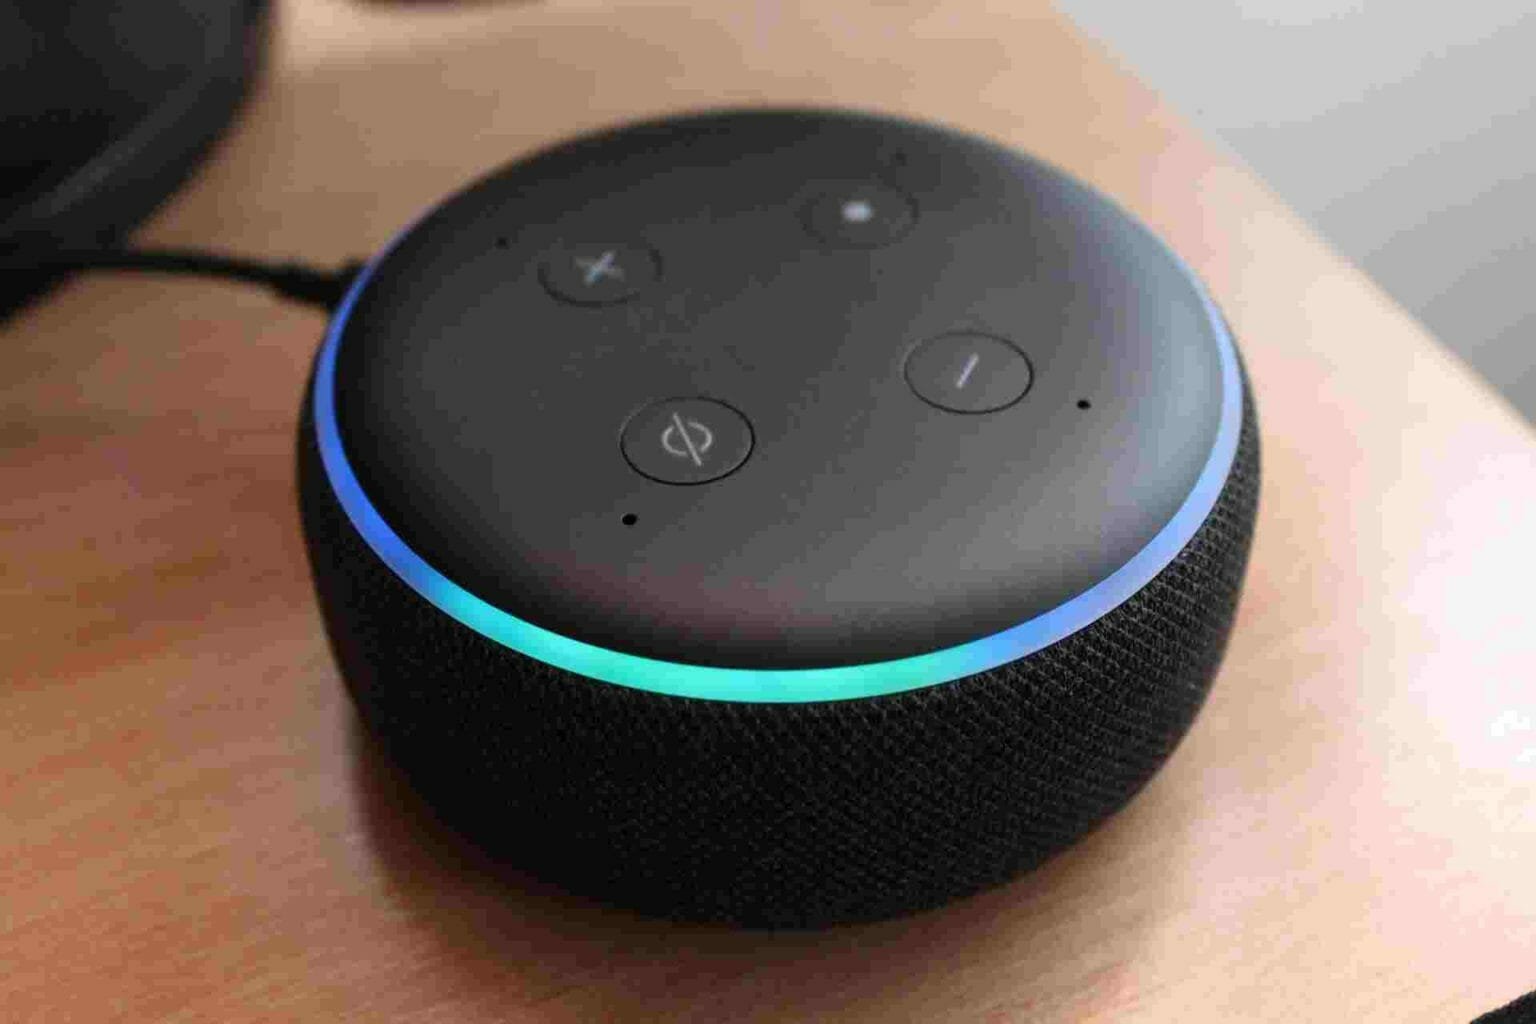 alexa-device-is-unresponsive-here-s-what-you-can-do-home-rook